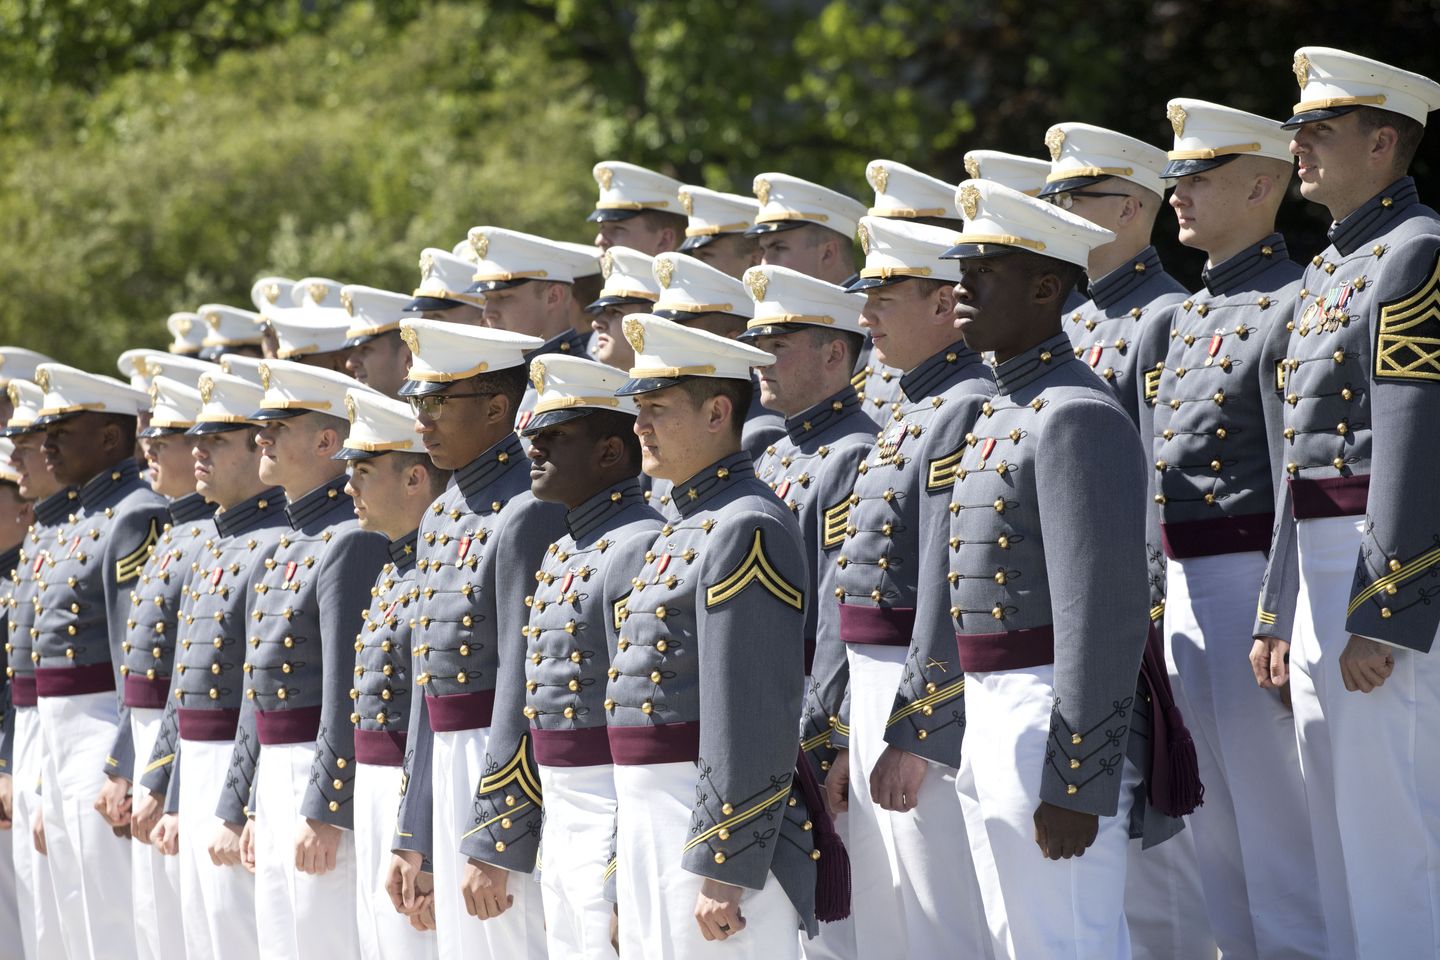 West Point cadets schooled on 'whiteness,' 'queer theory' under newly revealed CRT regime